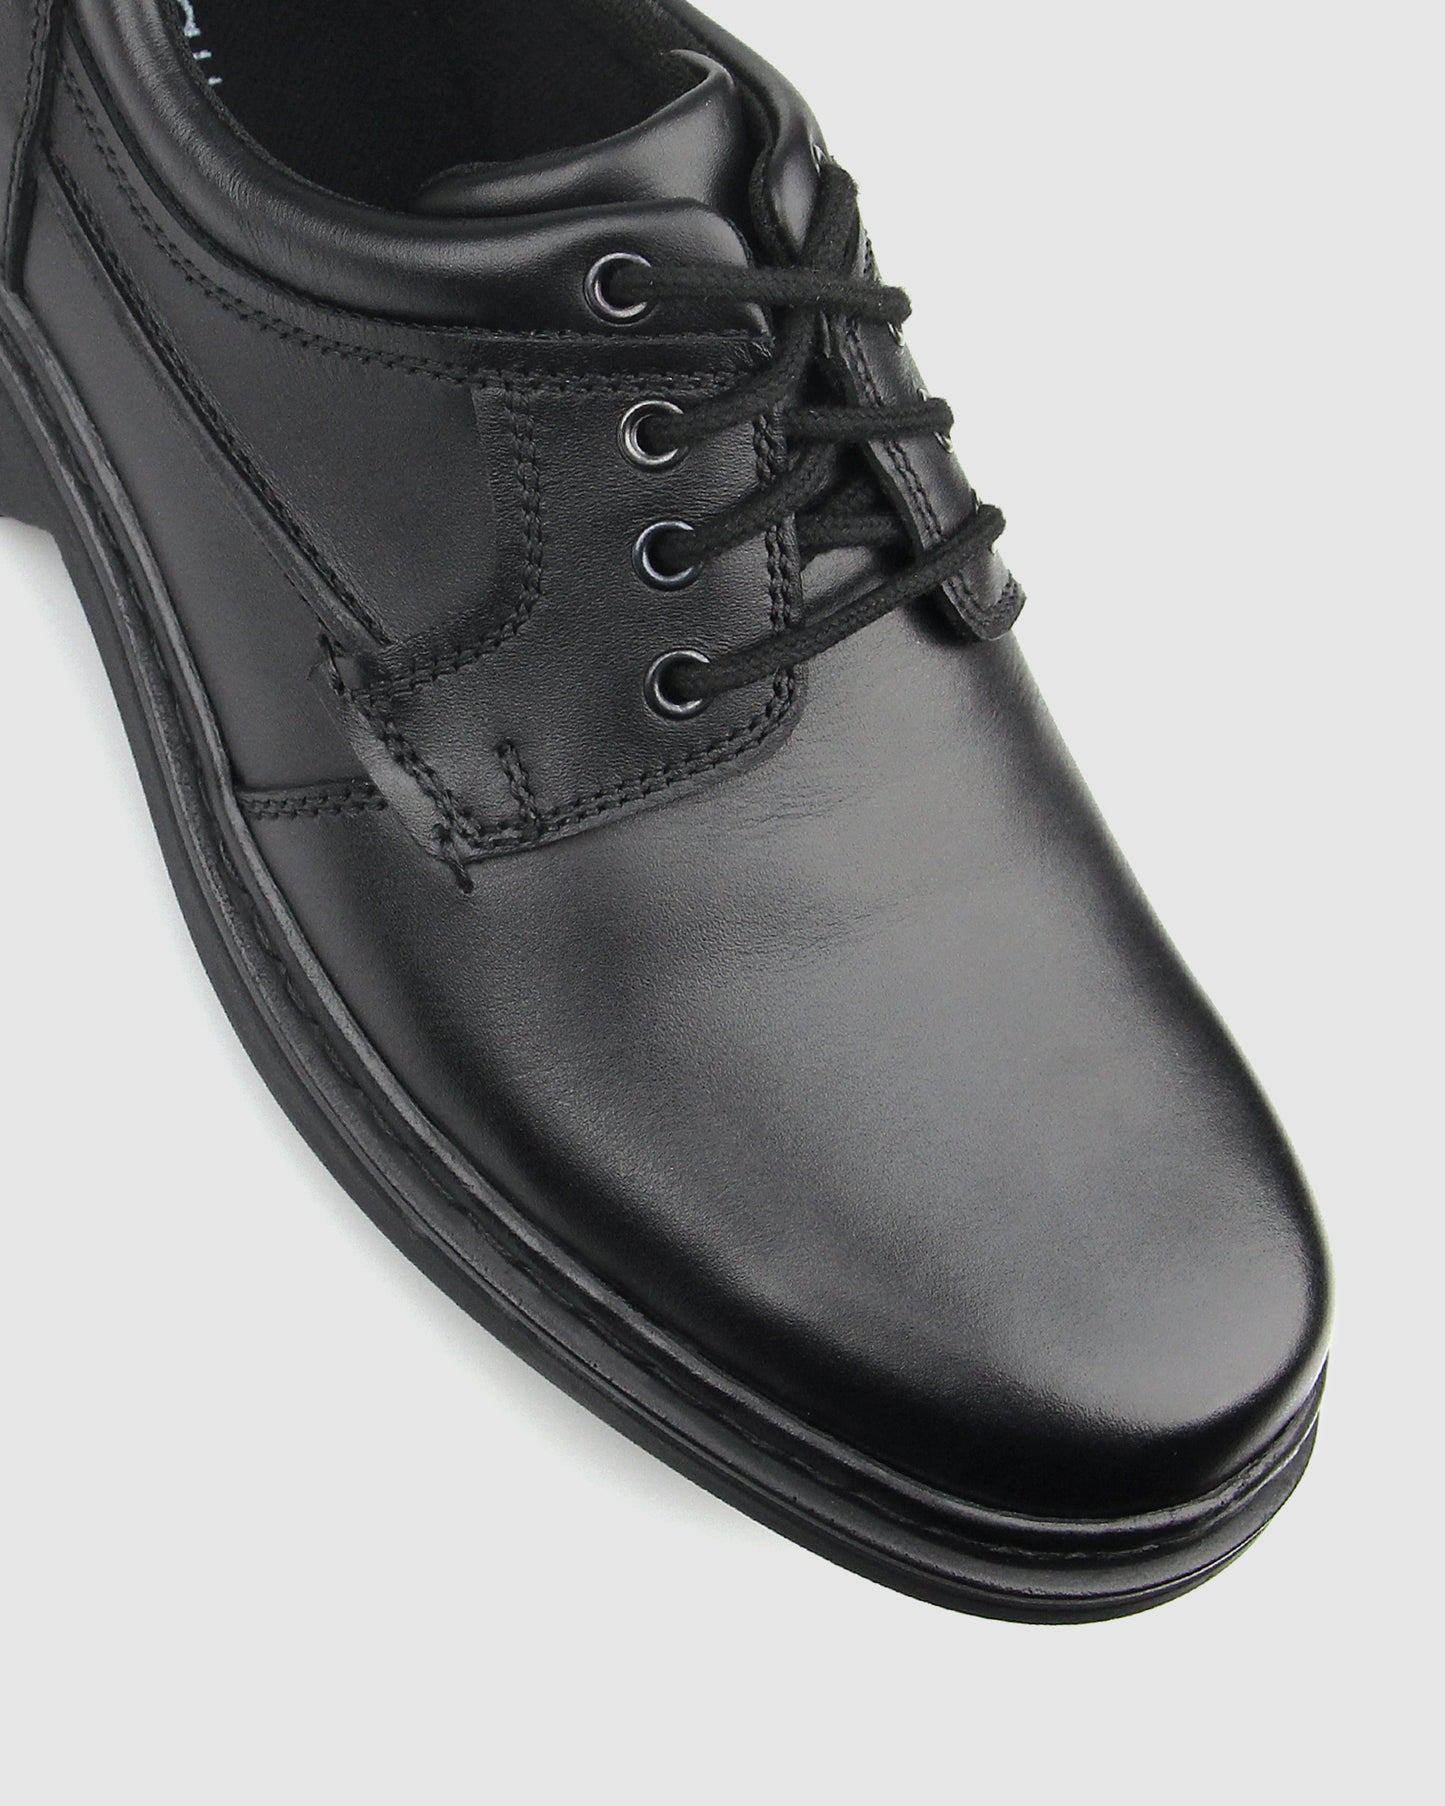 LARRY Leather Comfort Shoes